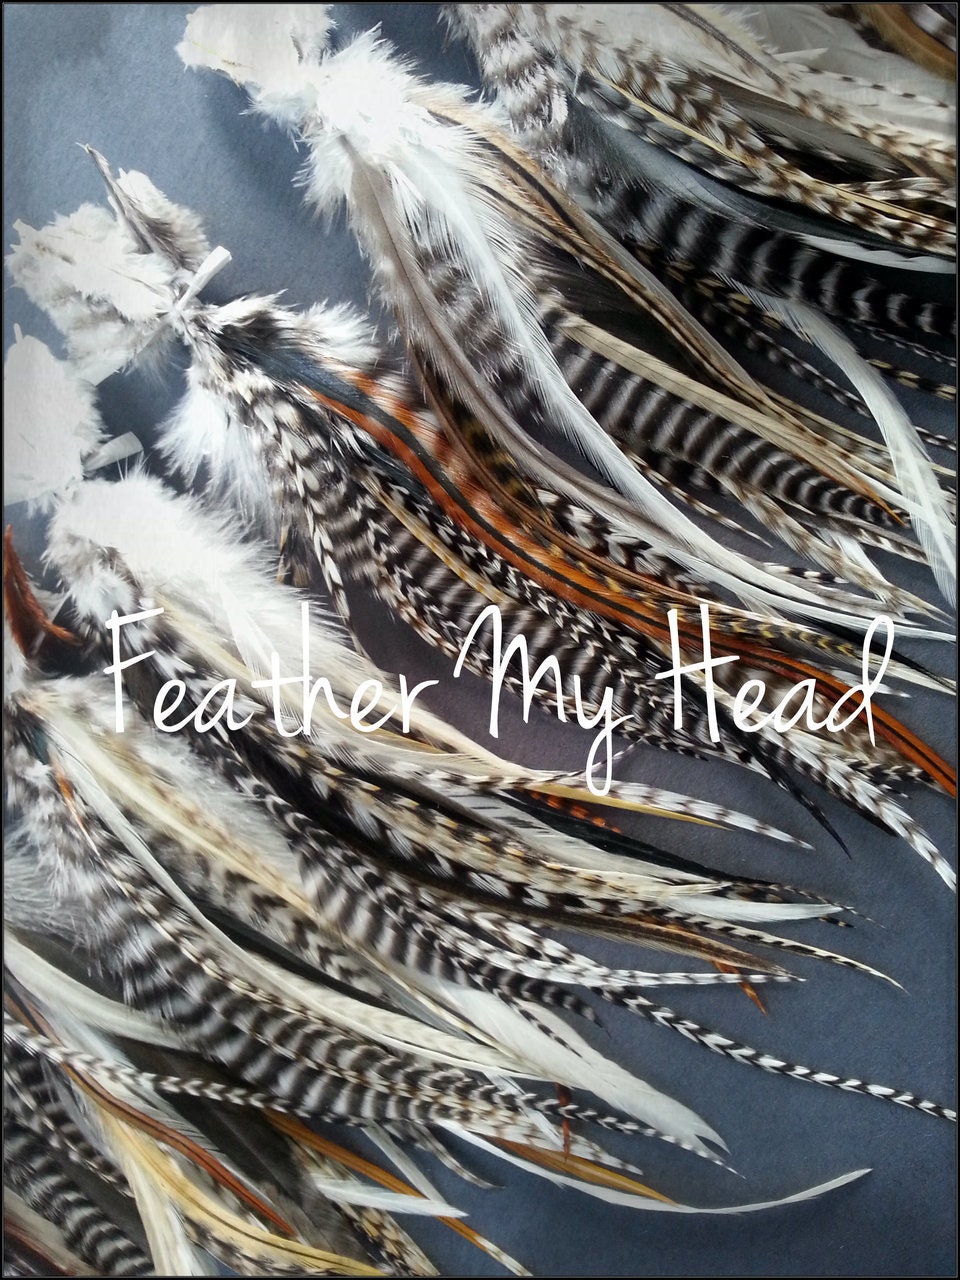 Feather Hair Extension Kit: 5 Real Bonded Thin Feathers with 3 Hair Crimps and Hair Threader. Natural Colors, Blond, Brown, Grizzly, Black